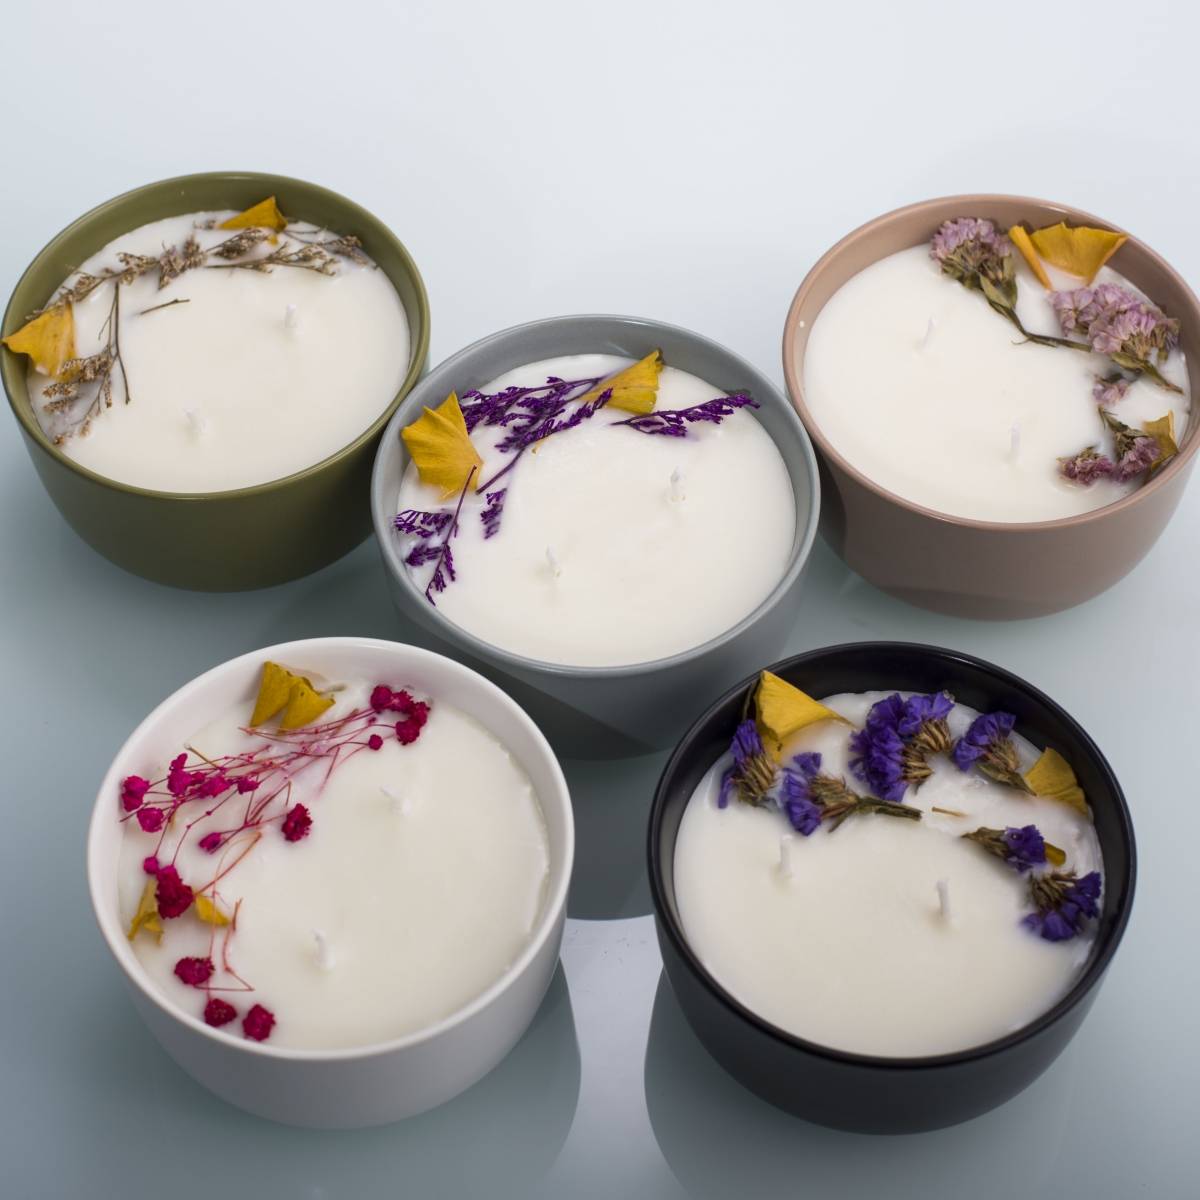 Soy Candles：Chanel ,No 5 ,Pink Flower ,China Factory ,Price ,Matte White Ceramic bowl ,Perfume Candles-HOWCANDLE-Candles,Scented Candles,Aromatherapy Candles,Soy Candles,Vegan Candles,Jar Candles,Pillar Candles,Candle Gift Sets,Essential Oils,Reed Diffuser,Candle Holder,